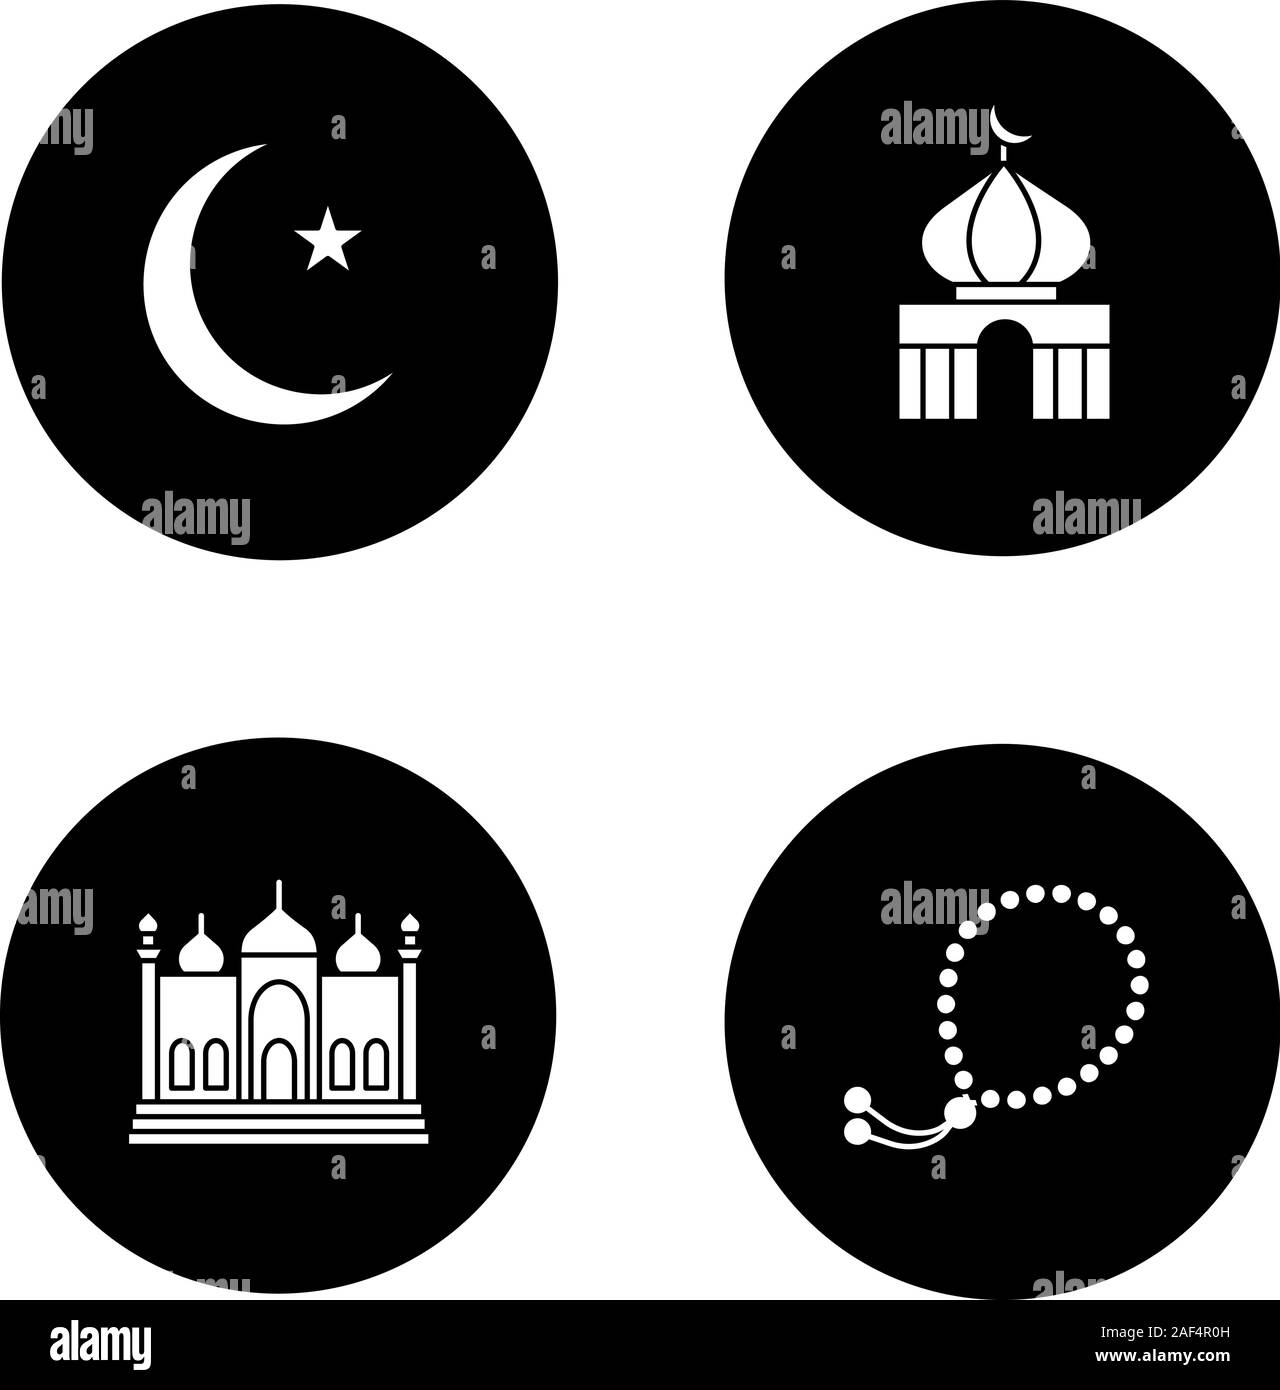 Islamic culture glyph icons set. Crescent moon and star, mosques, misbaha. Vector white silhouettes illustrations in black circles Stock Vector